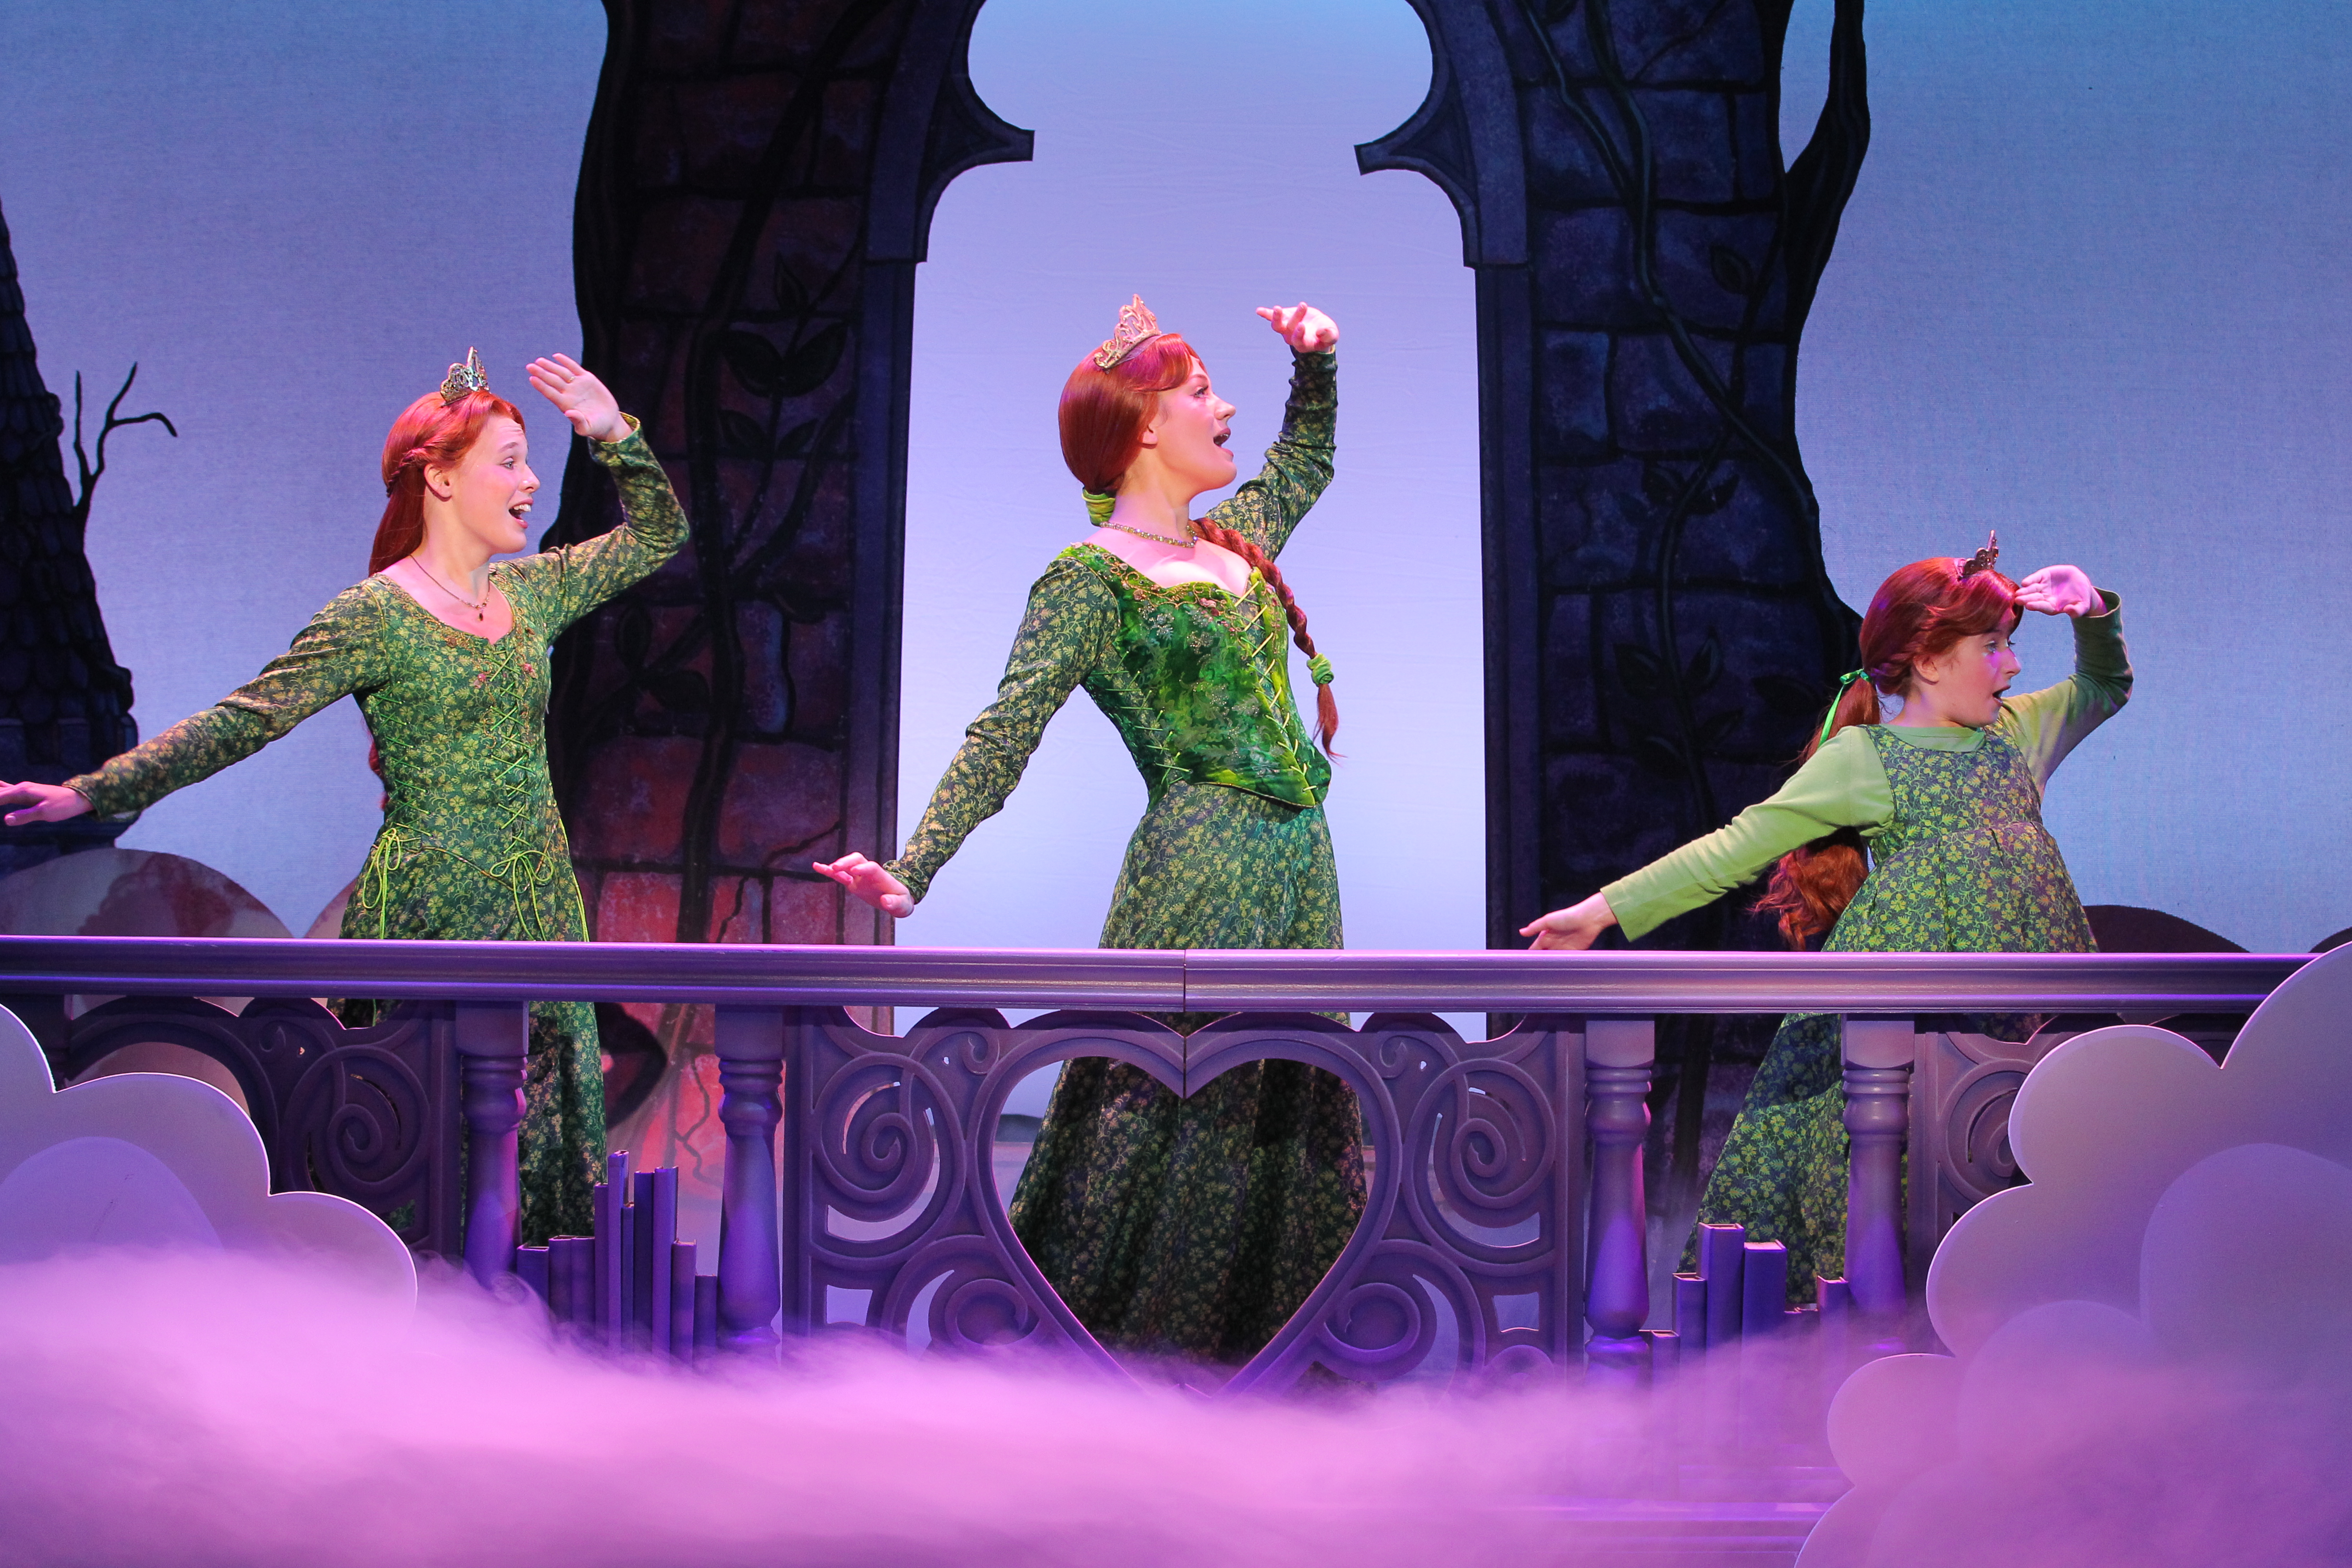 Alexa Kerner as Young Fiona in the National Tour of Shrek the Musical